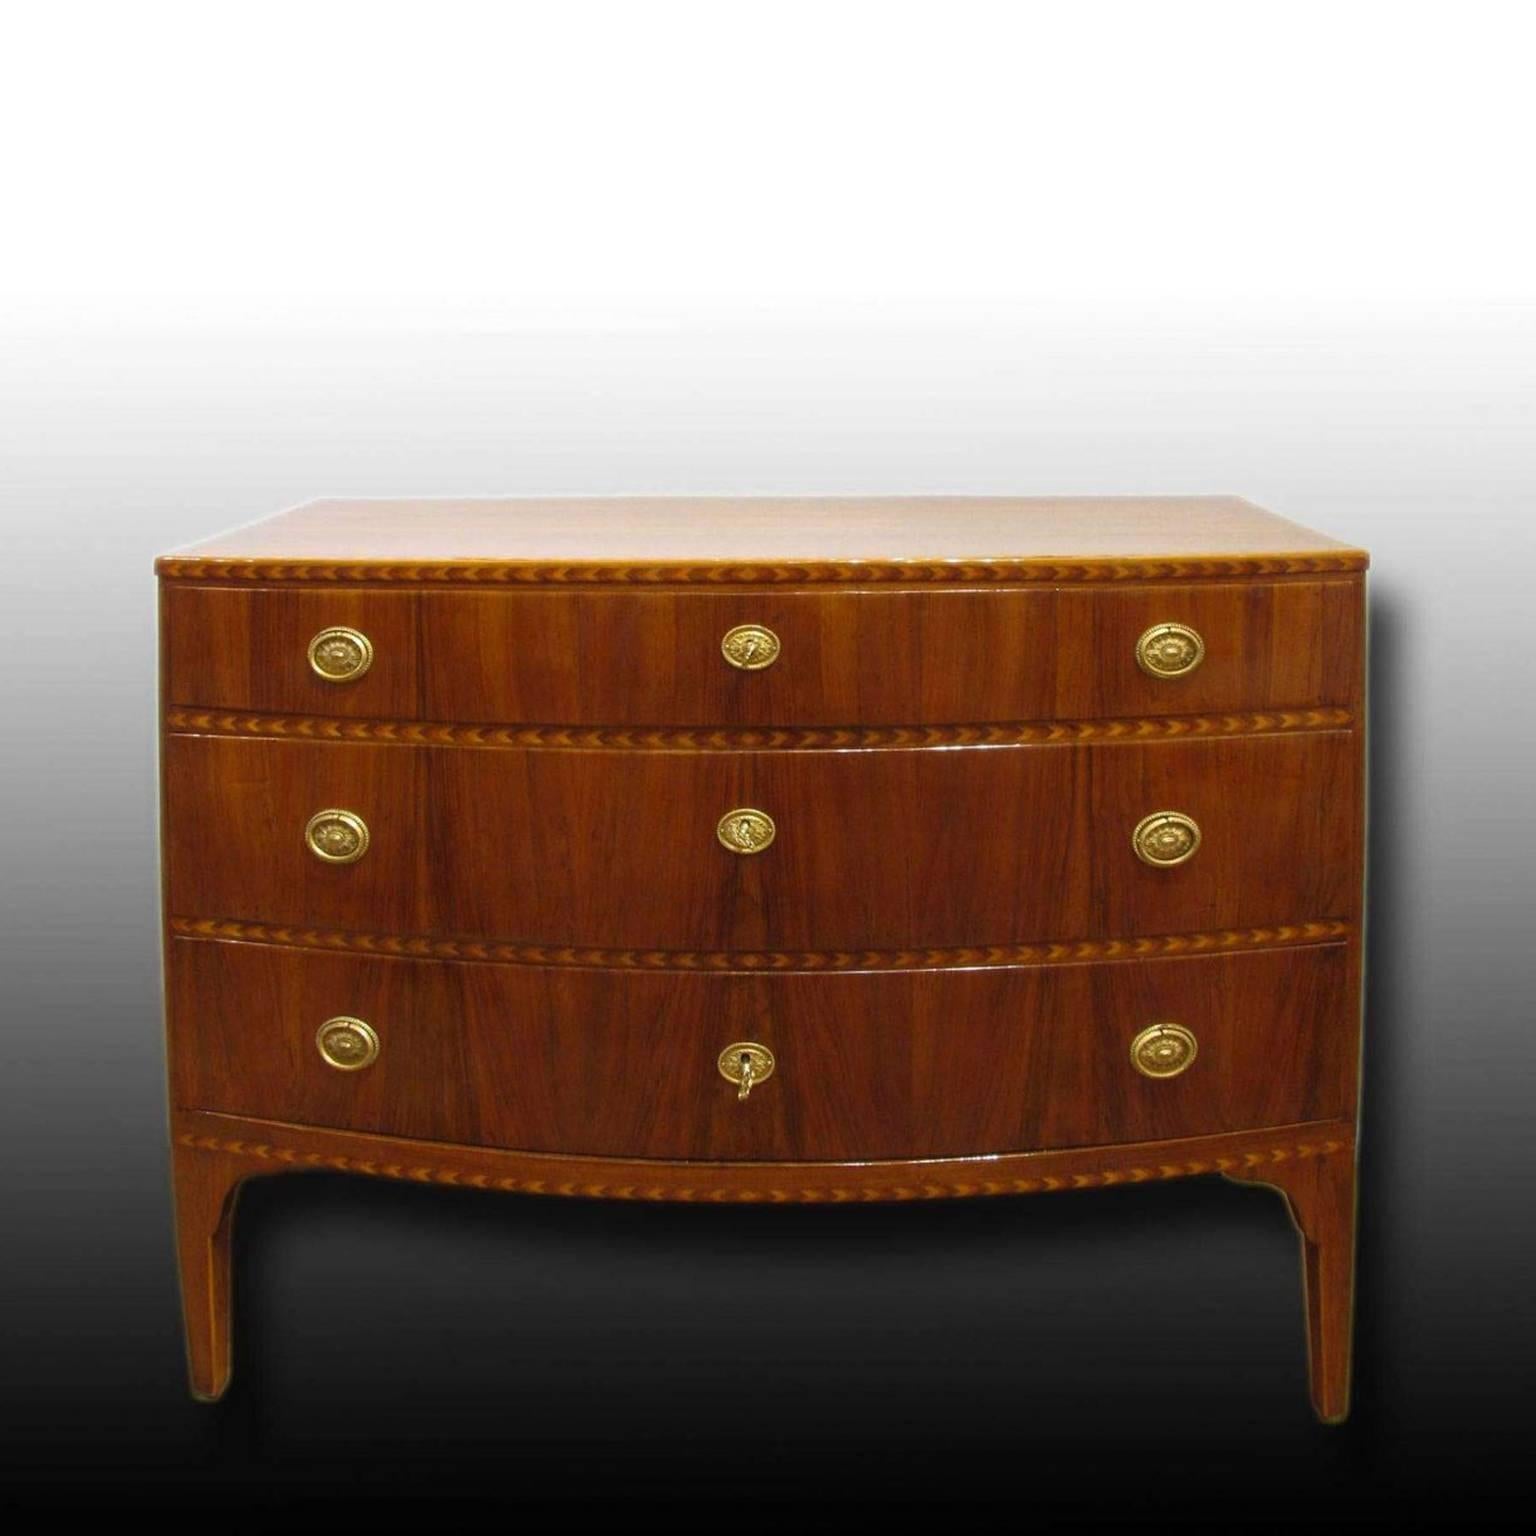 A beautiful Italian chest of drawers in solid walnut with inlays in walnut and fillets in rosewood and palisander.
Shaped front, with three drawers.
Venetia, end of the 18th century.